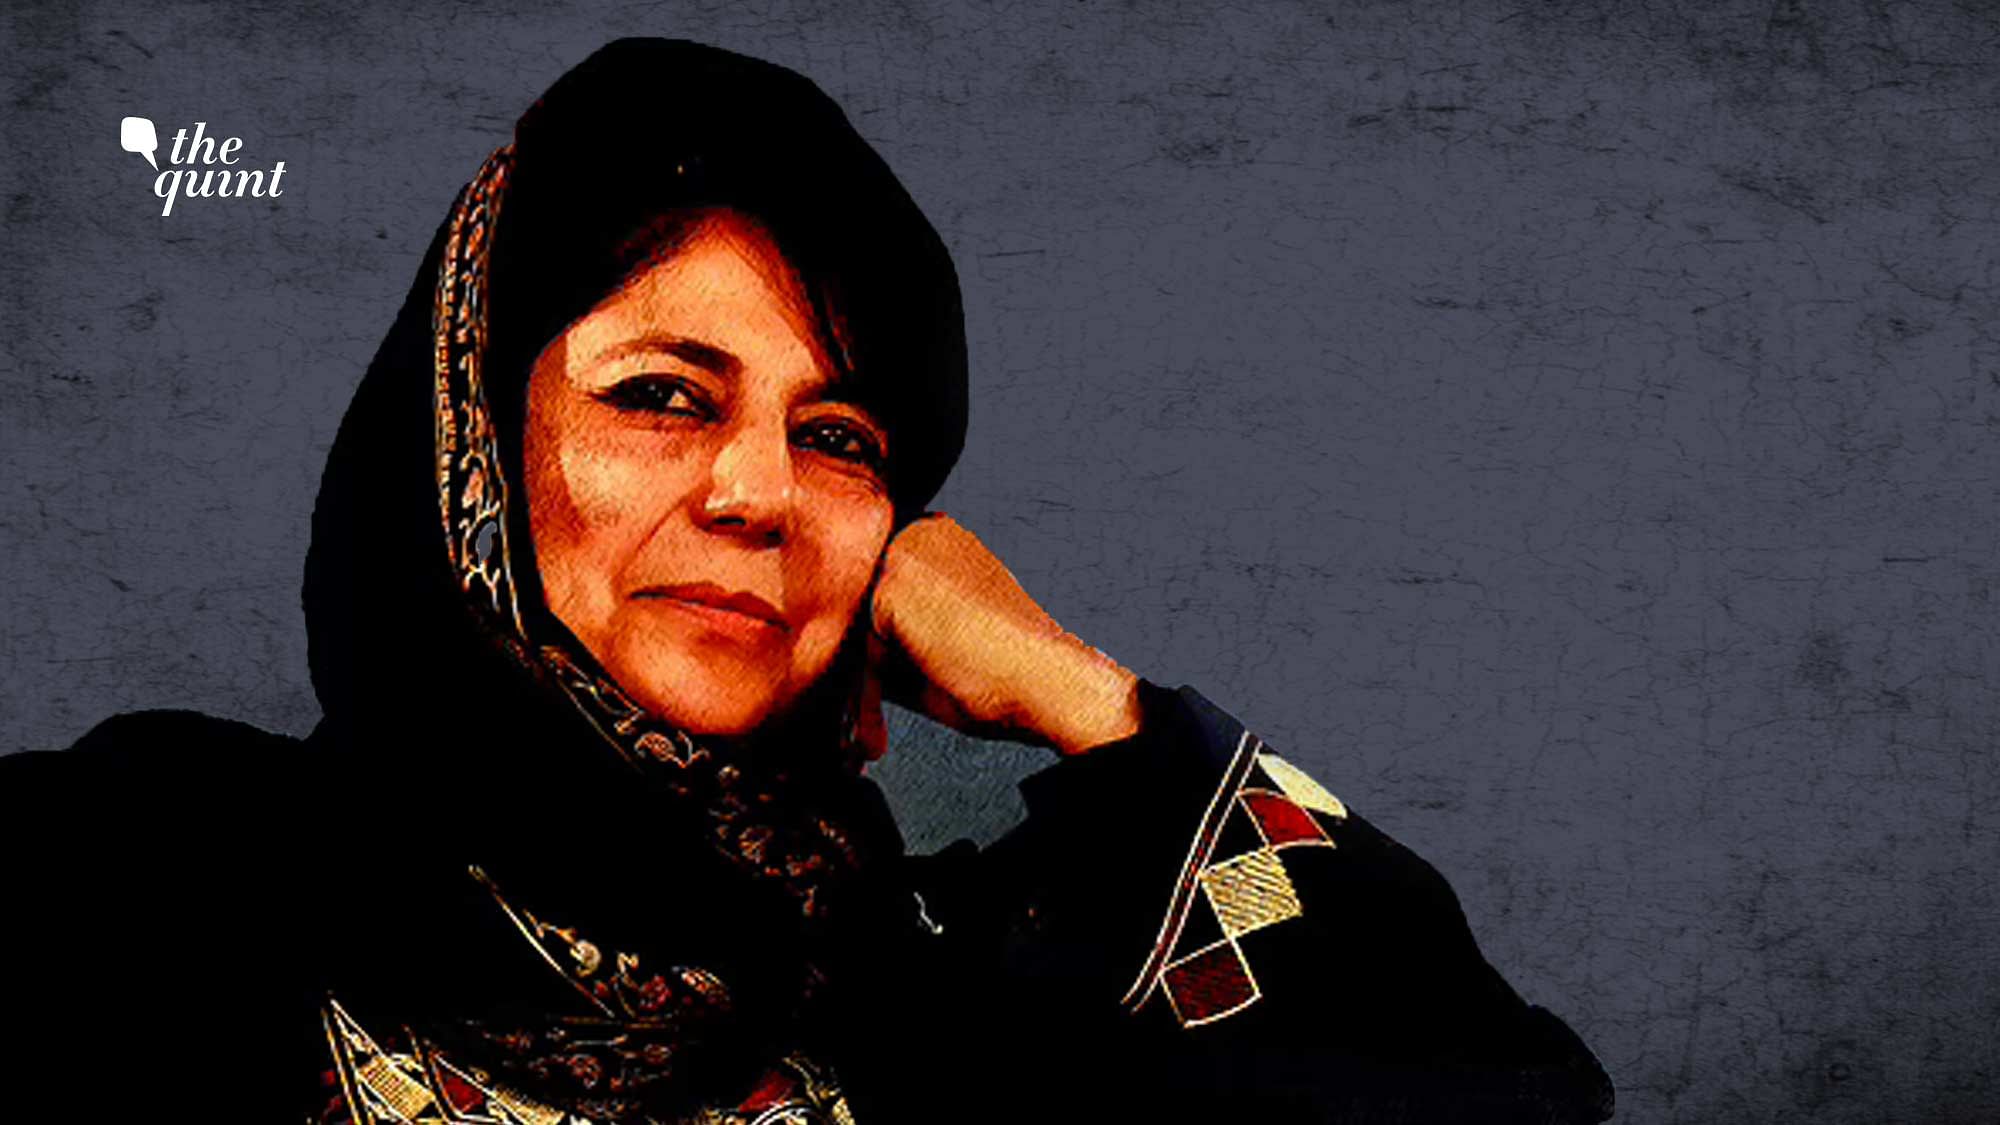 Mehbooba, who was the last chief minister of Jammu and Kashmir before the state was downgraded and bifurcated into two Union Territories by the central government last year, spent one year, two months and ten days in three different jails of Srinagar.